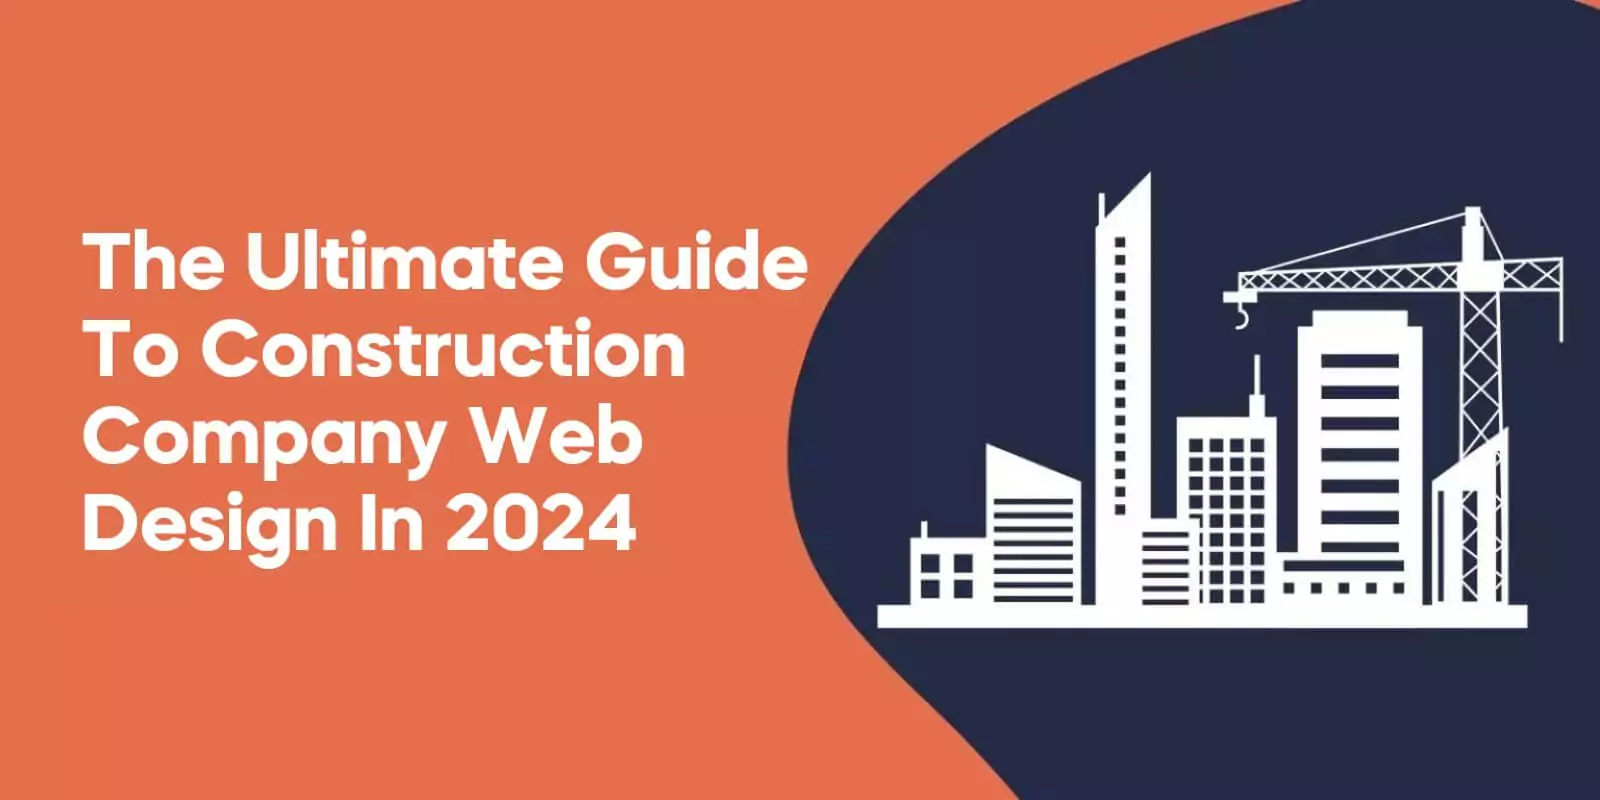 The Ultimate Guide to Construction Company Web Design in 2024